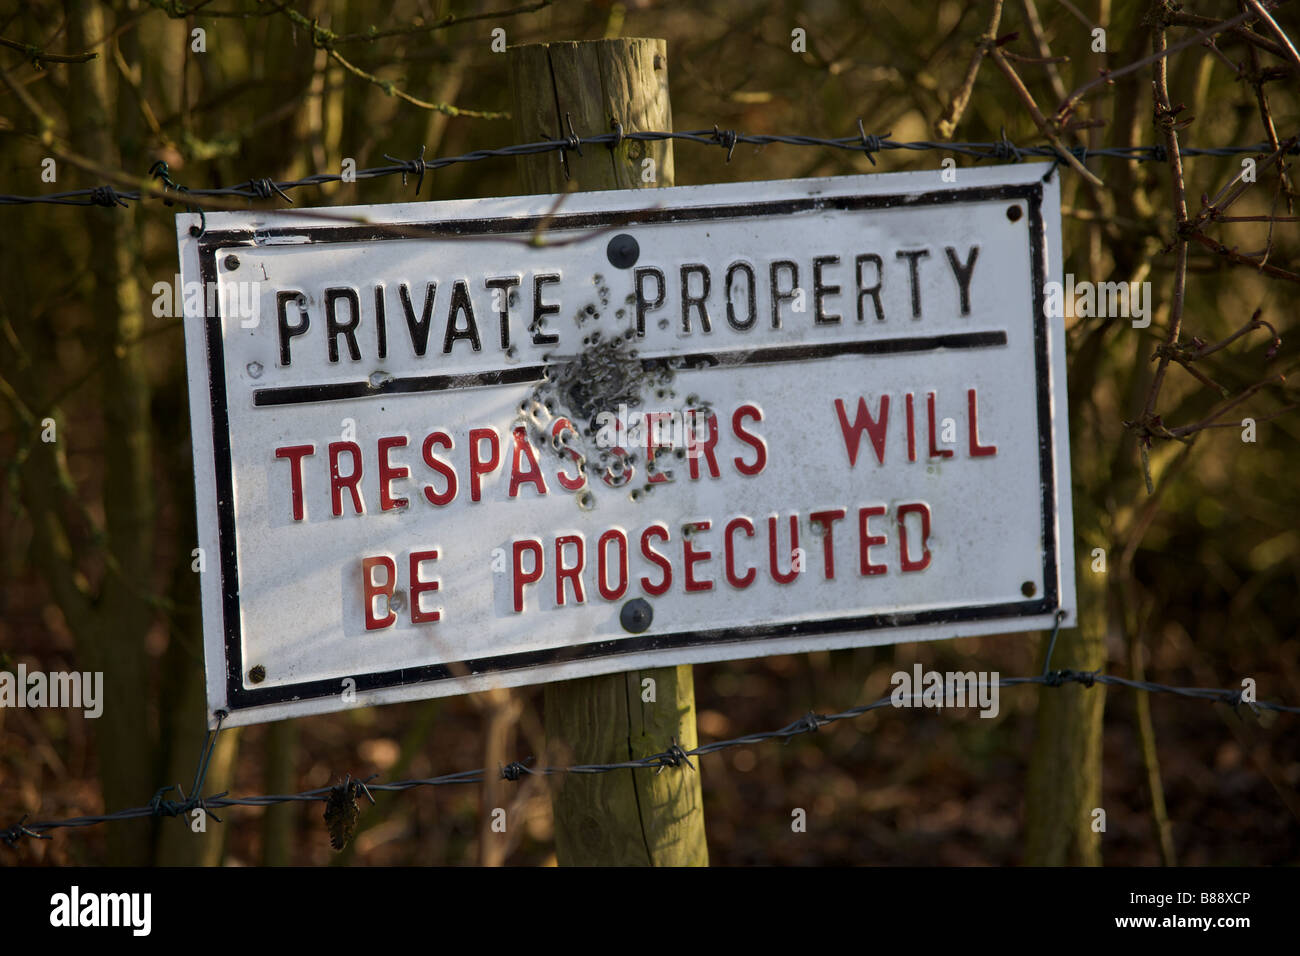 Private property sign in England Stock Photo